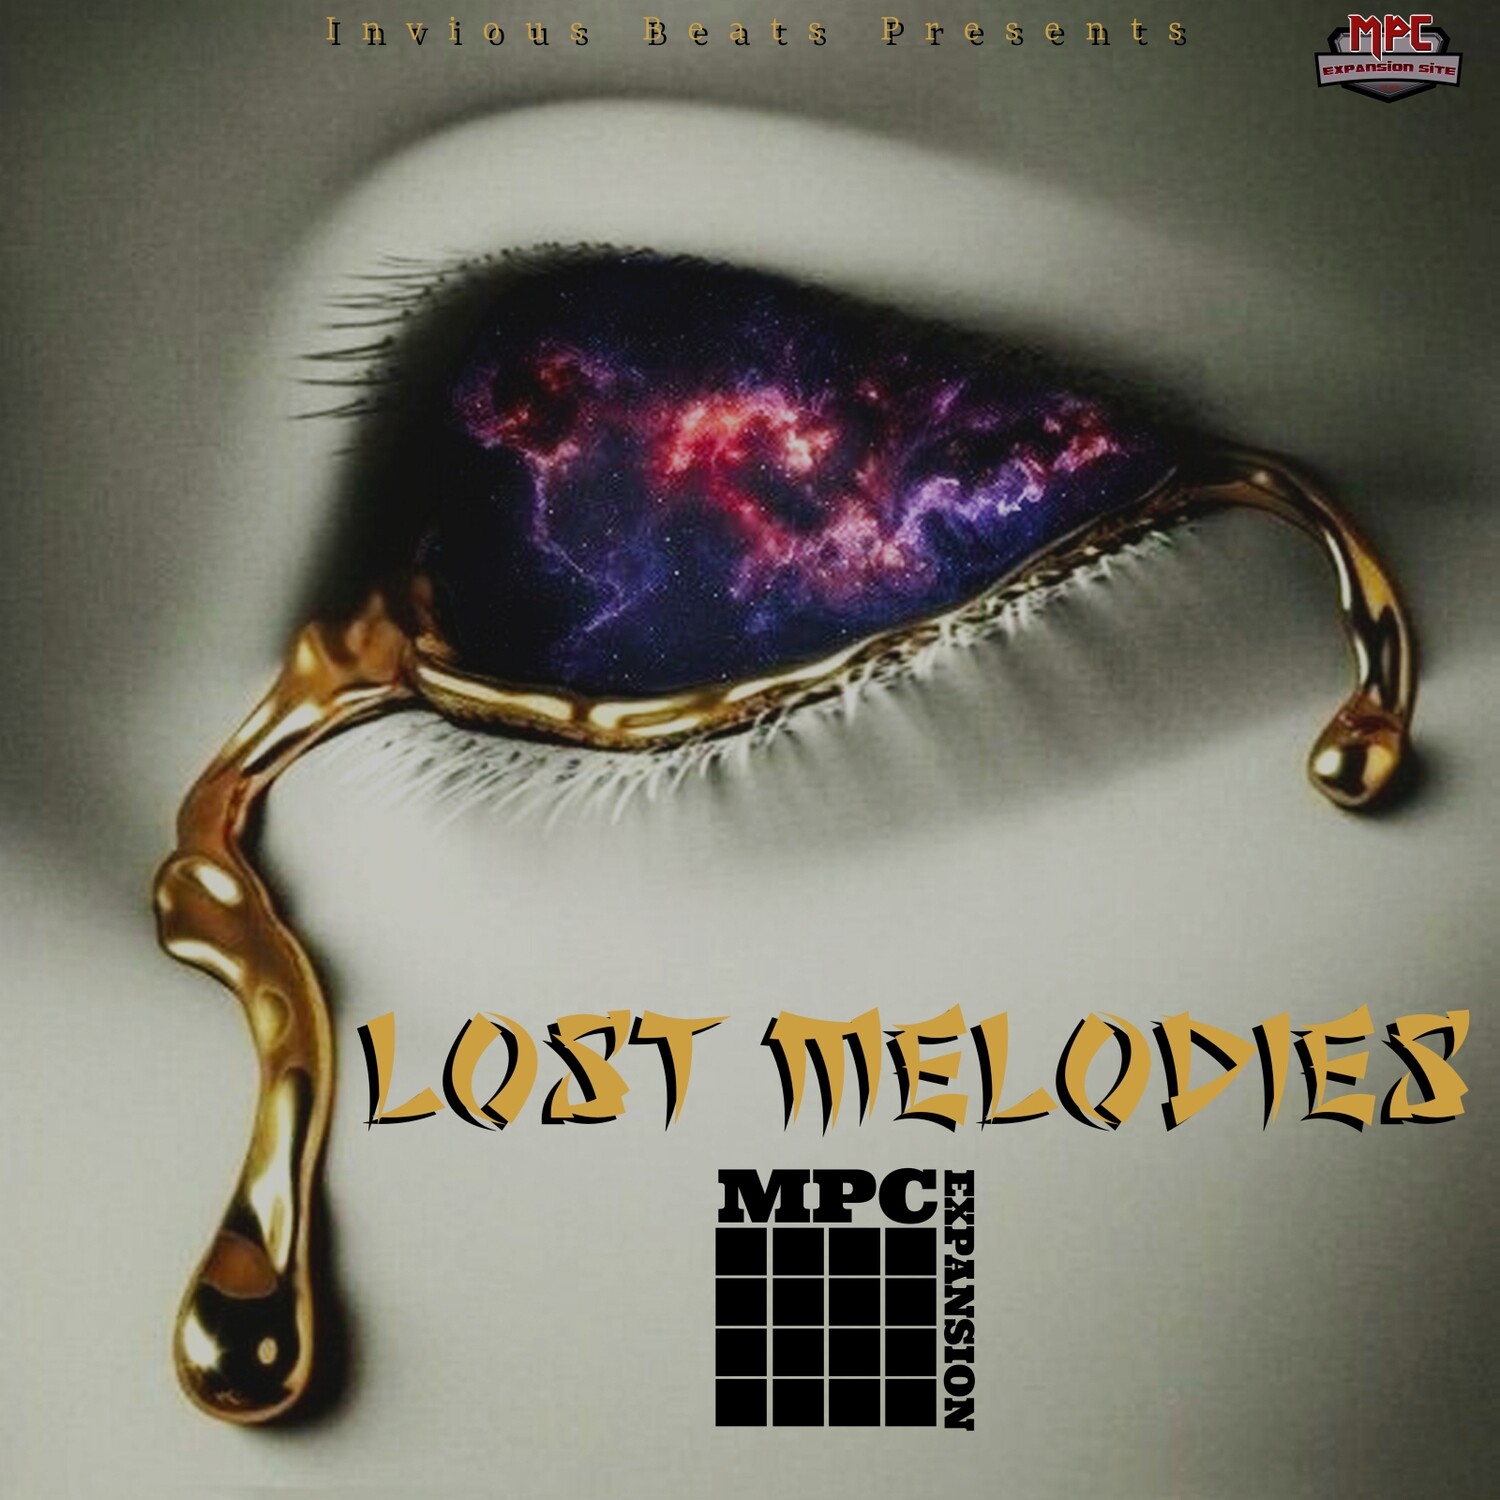 MPC EXPANSION 'LOST MELODIES' by INVIOUS